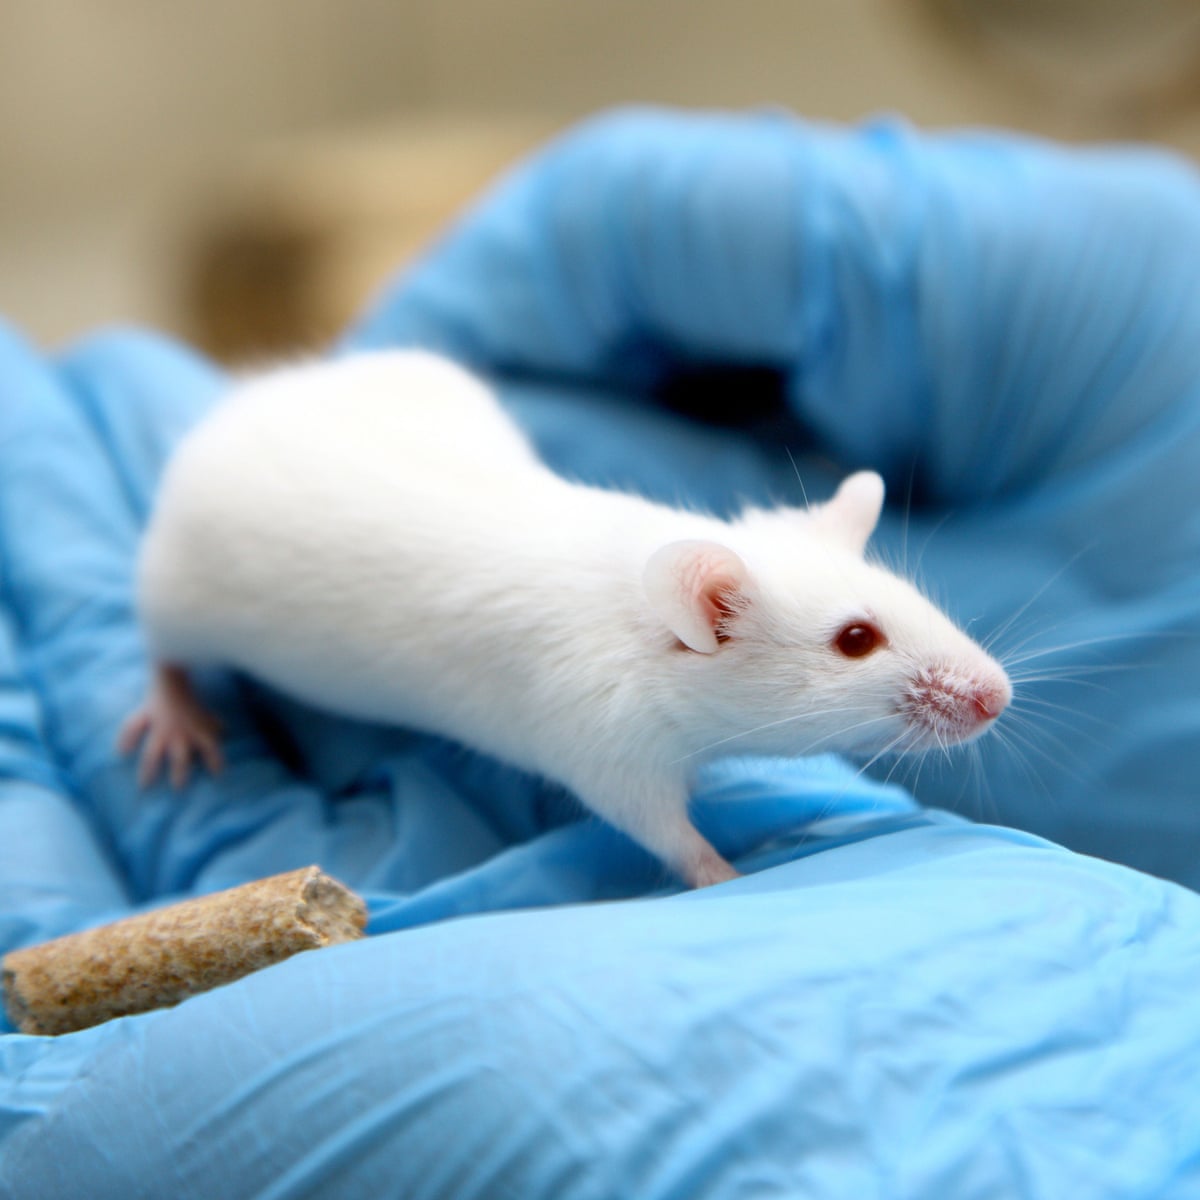 Drugs research hampered by substandard animal testing procedures | Drugs |  The Guardian